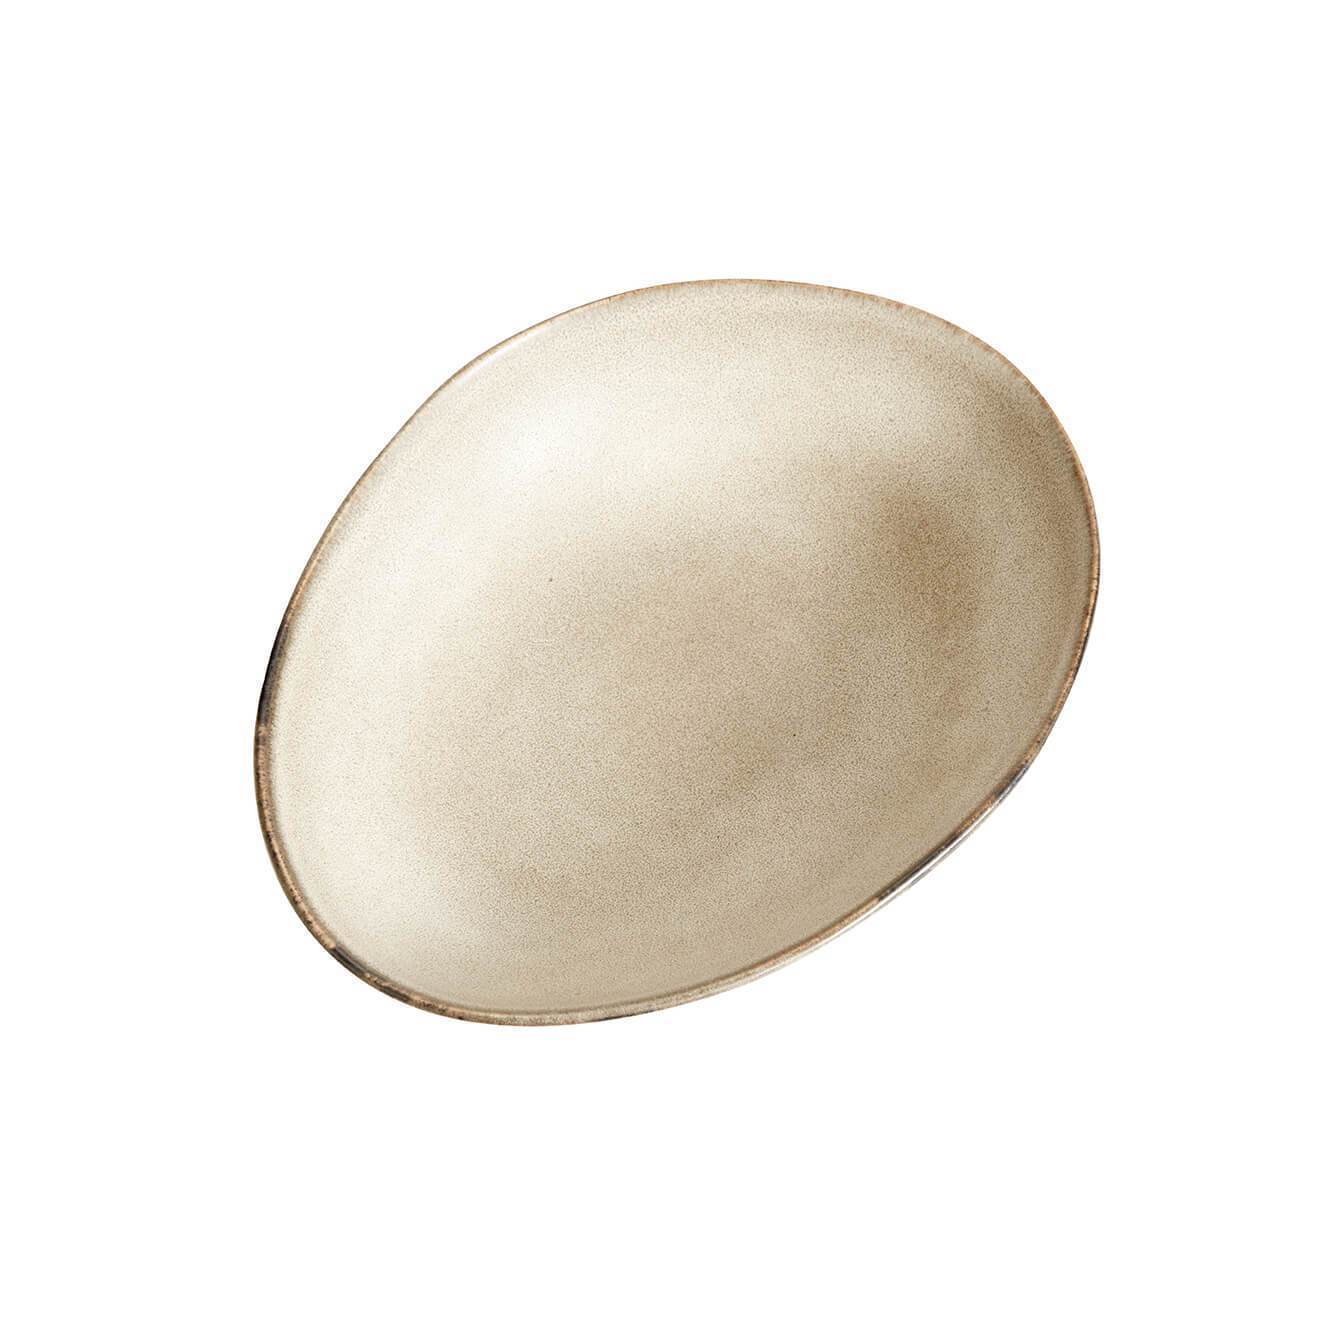 MUUBS MAME Oyster, 19cm